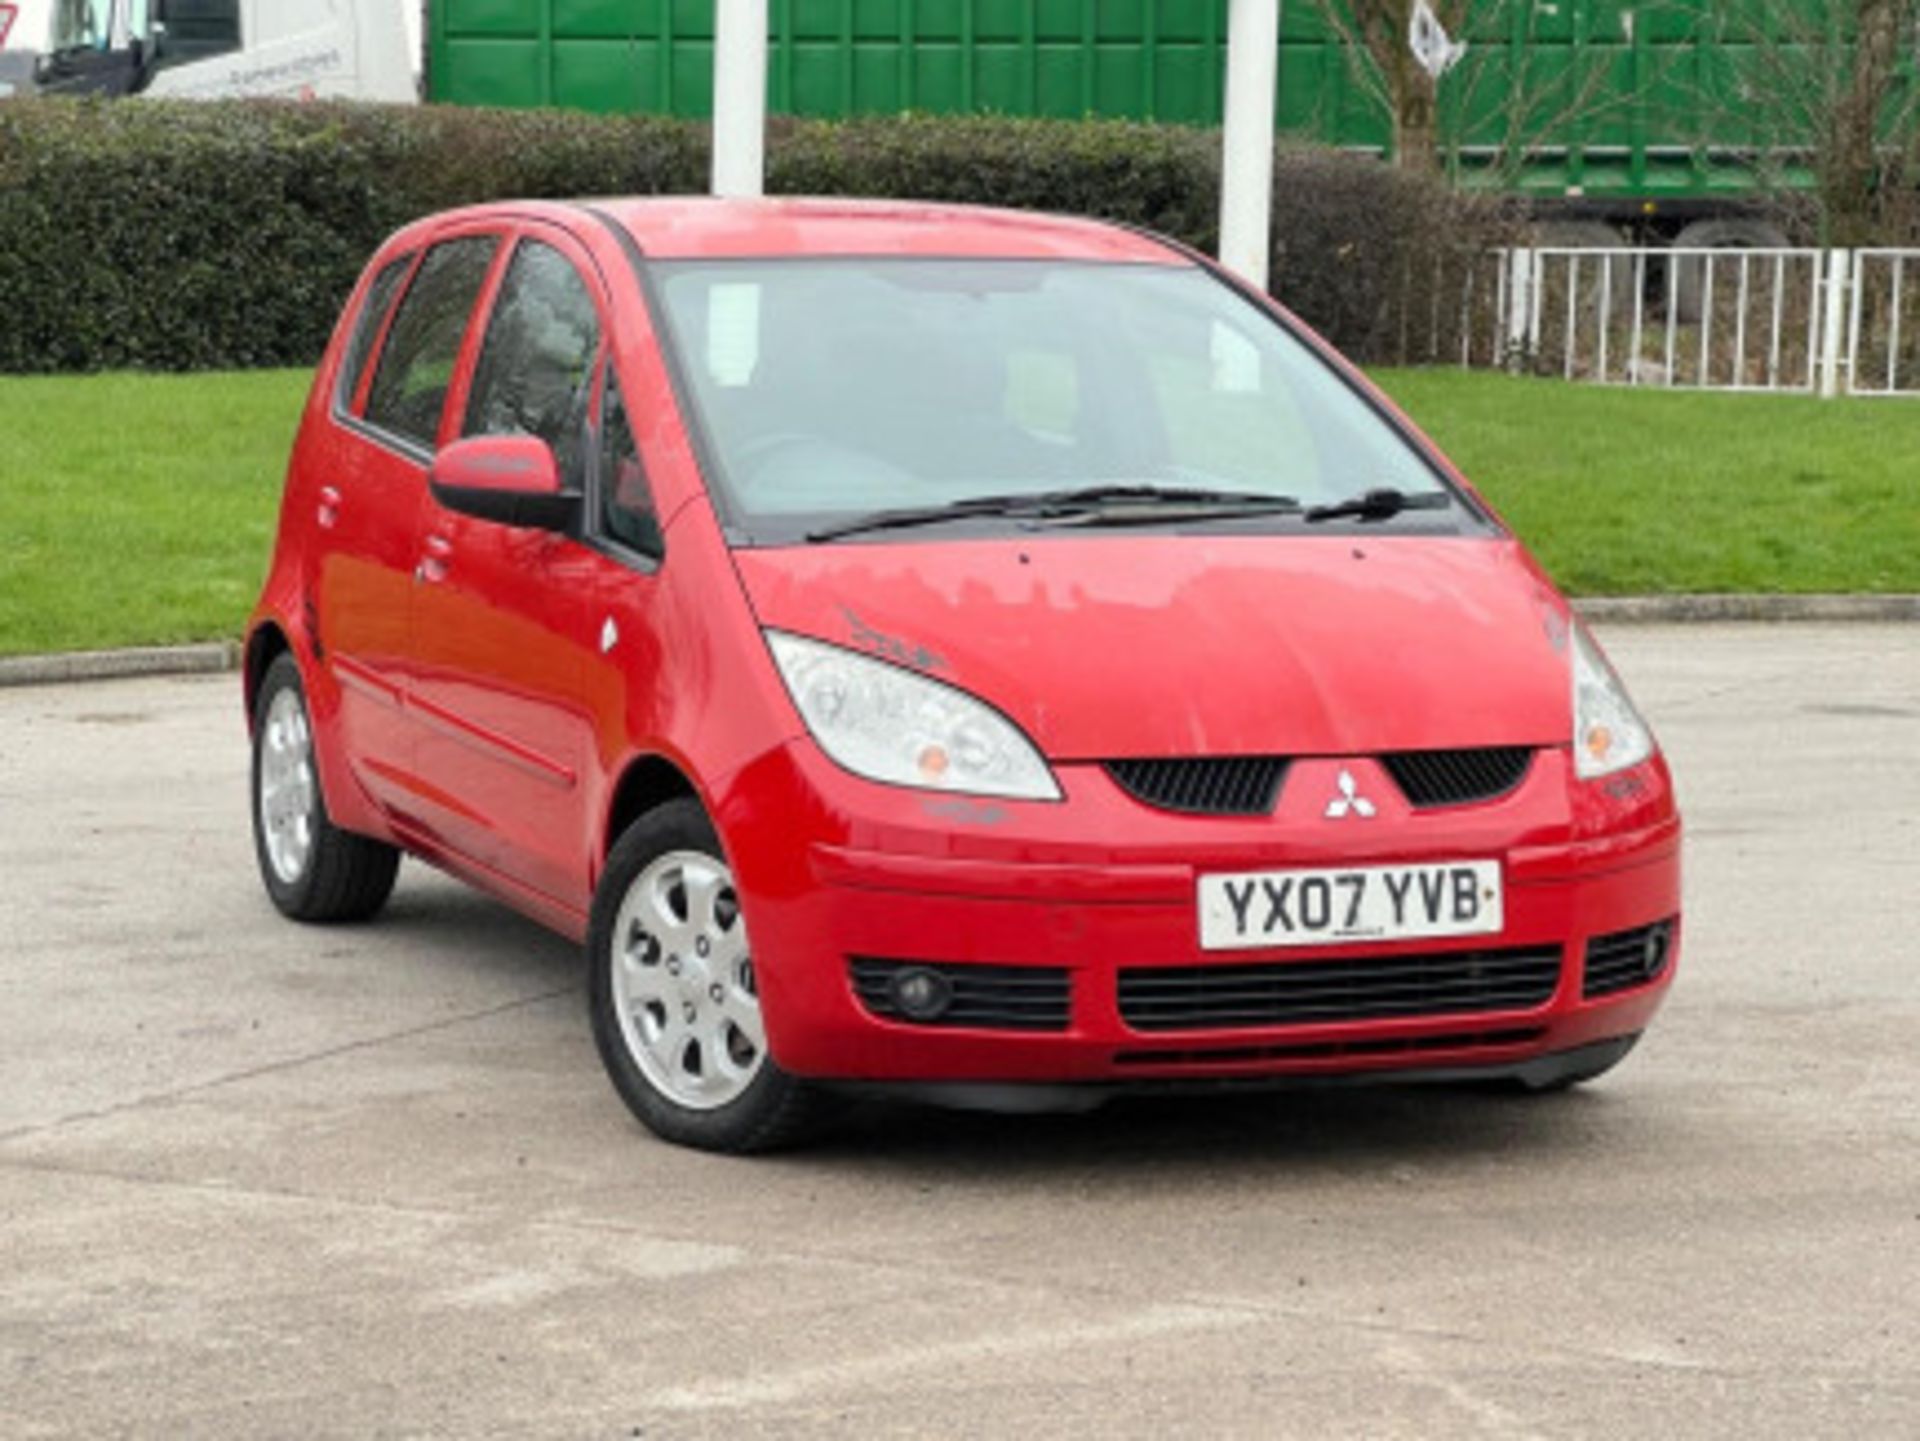 2007 MITSUBISHI COLT 1.5 DI-D DIESEL AUTOMATIC >>--NO VAT ON HAMMER--<< - Image 94 of 191